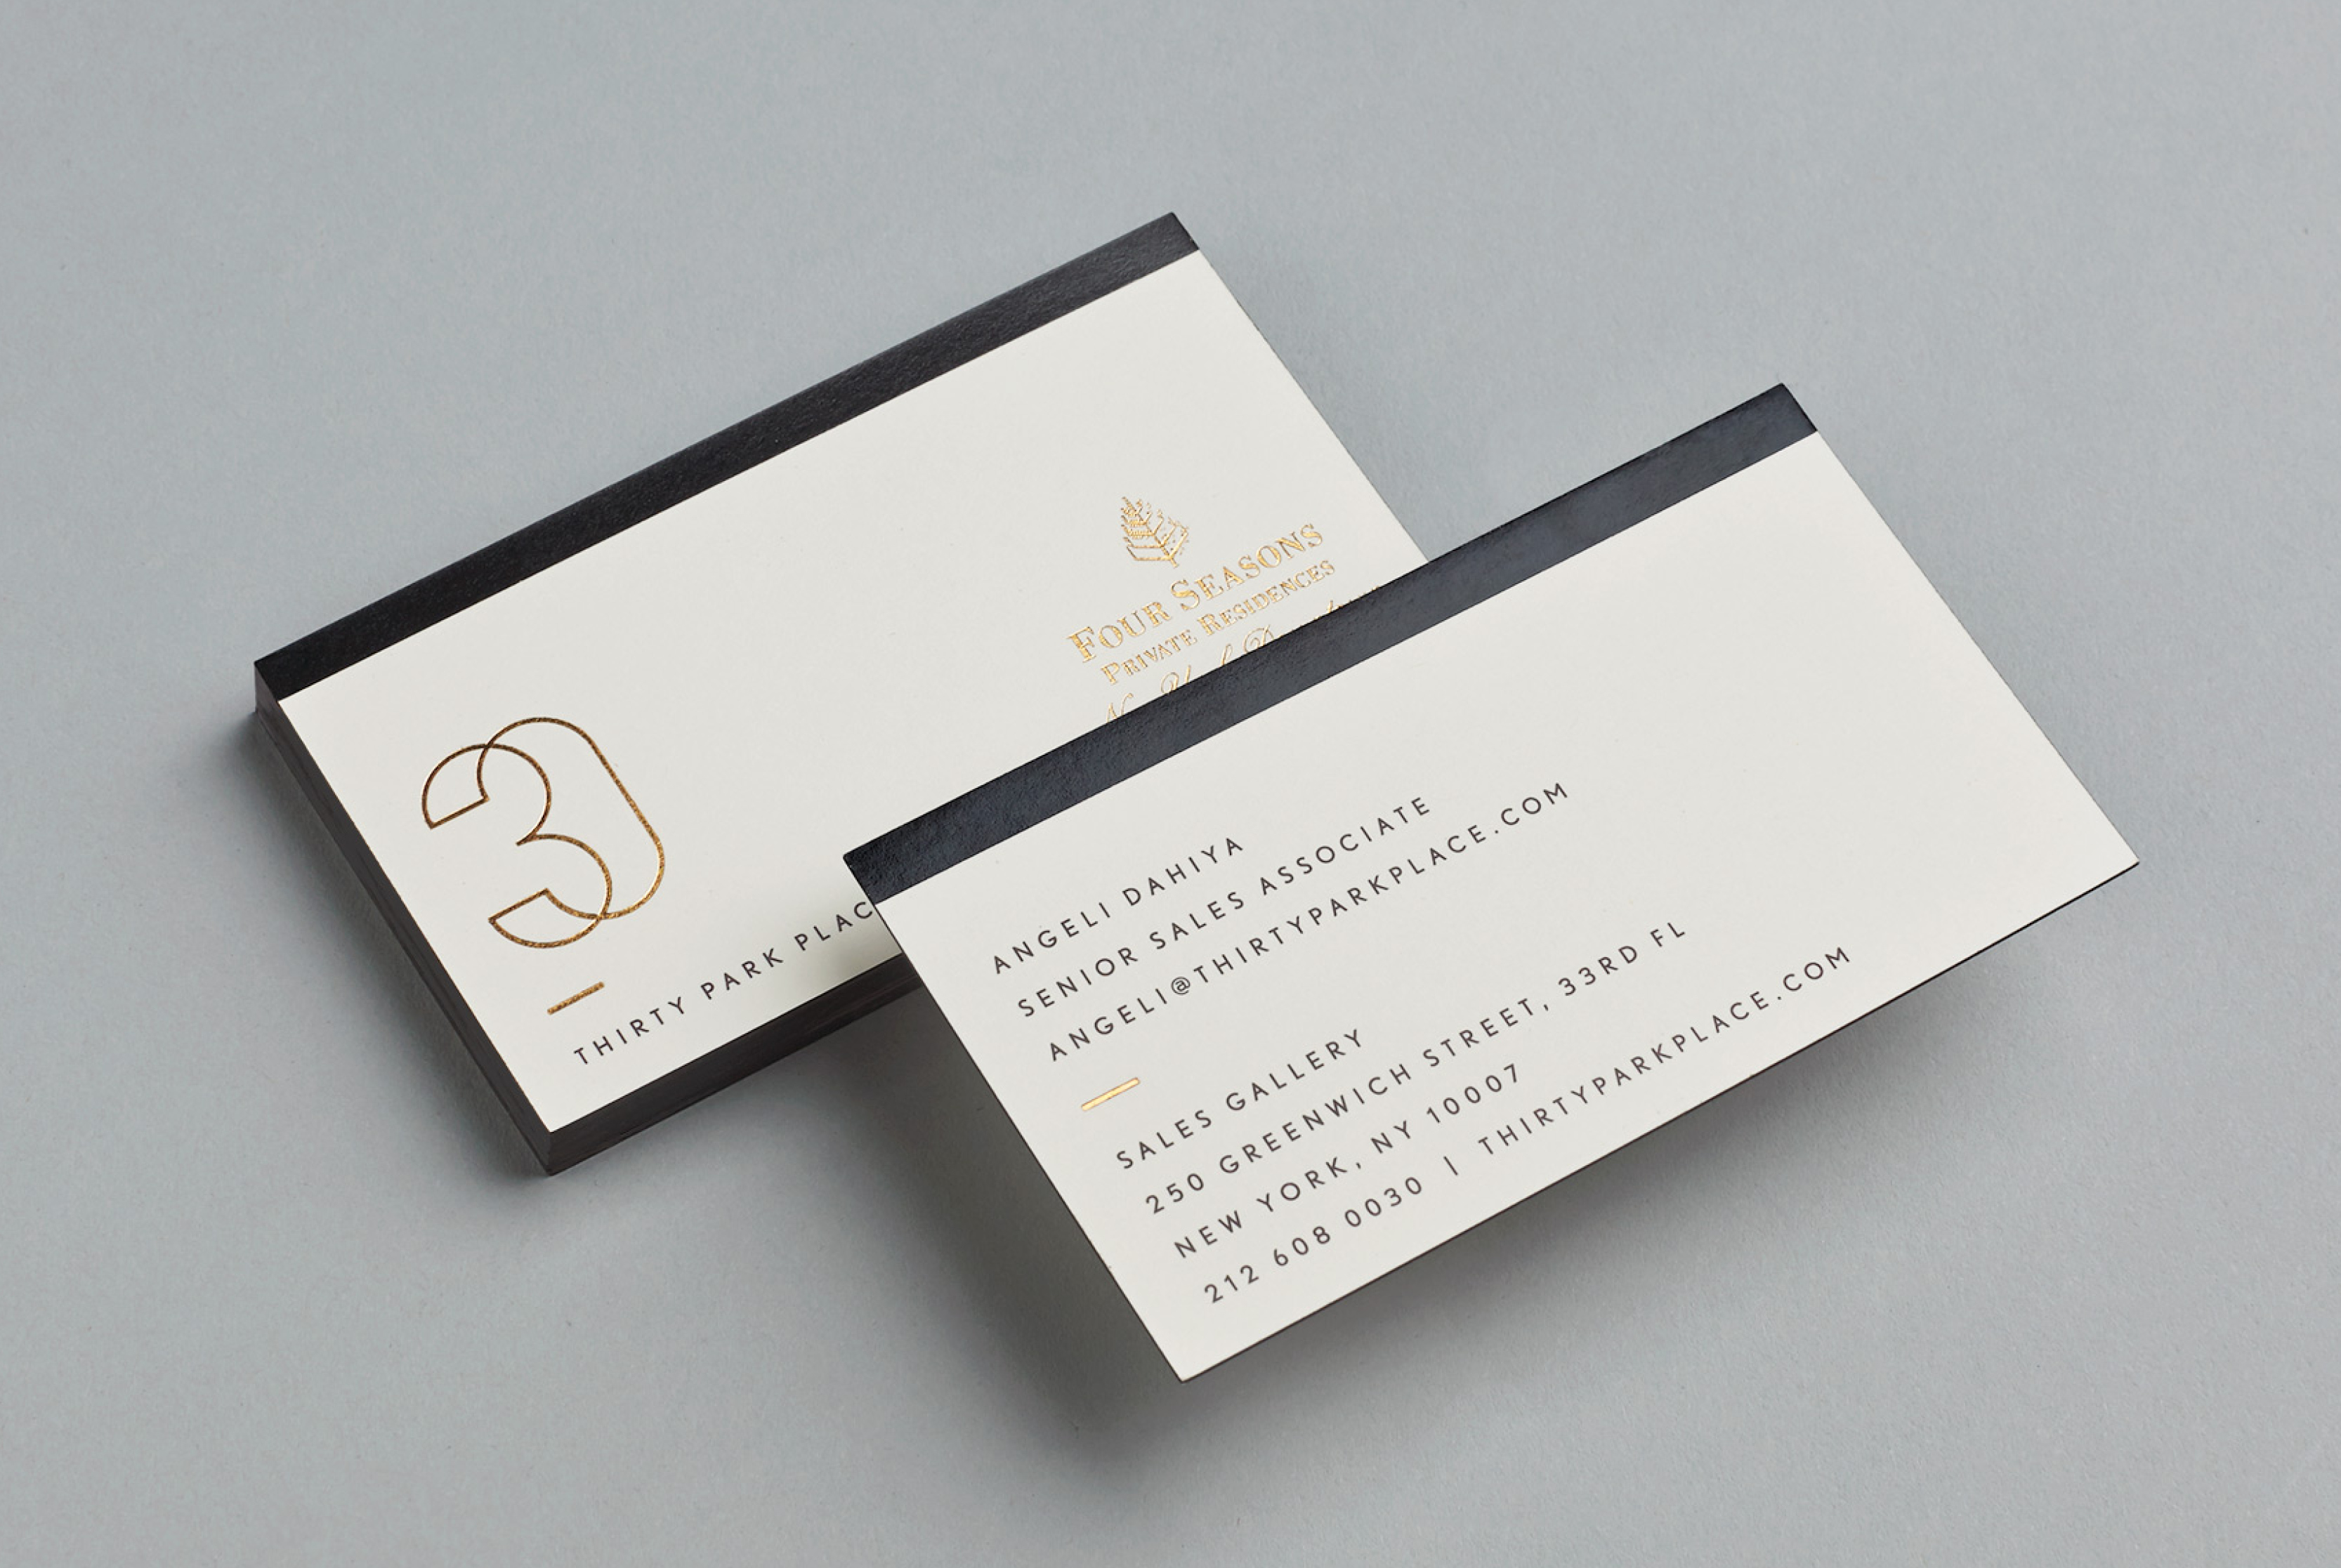 Gold foiled business cards for Four Seasons private residence 30 Park Place by Mother